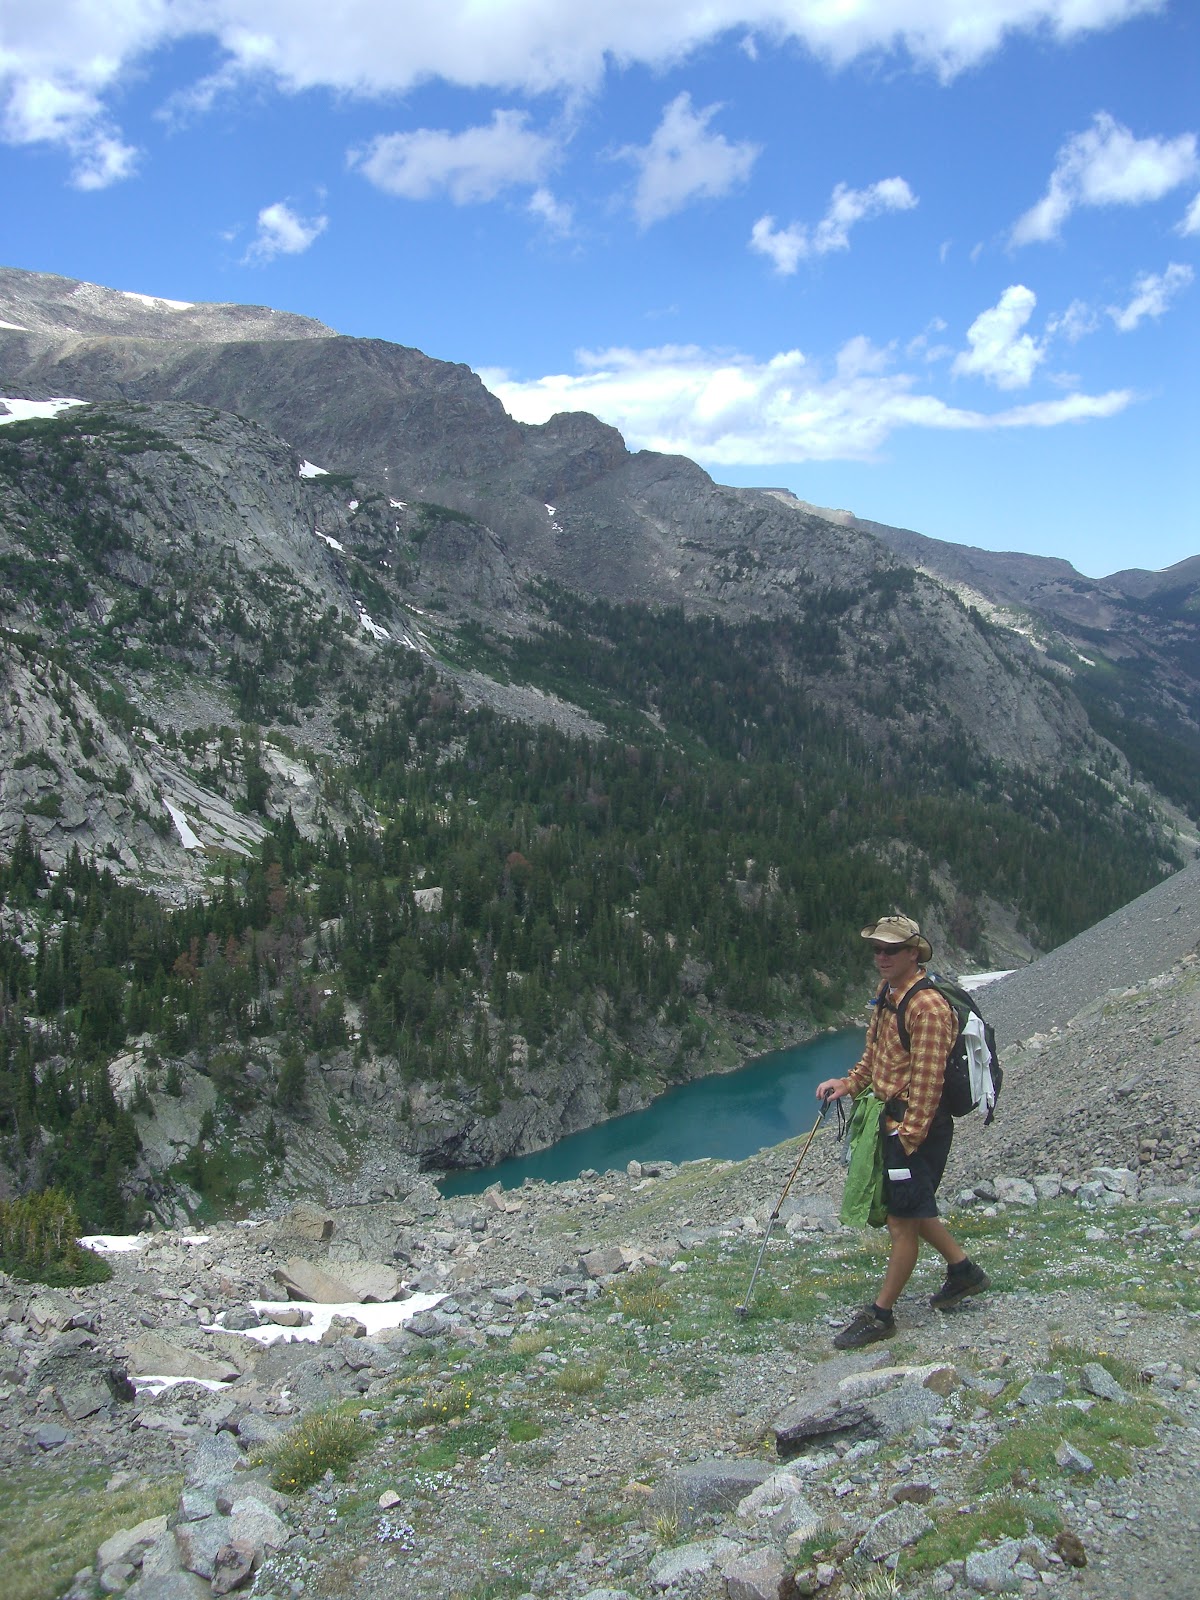 Hiking in the Beartooth Mountains